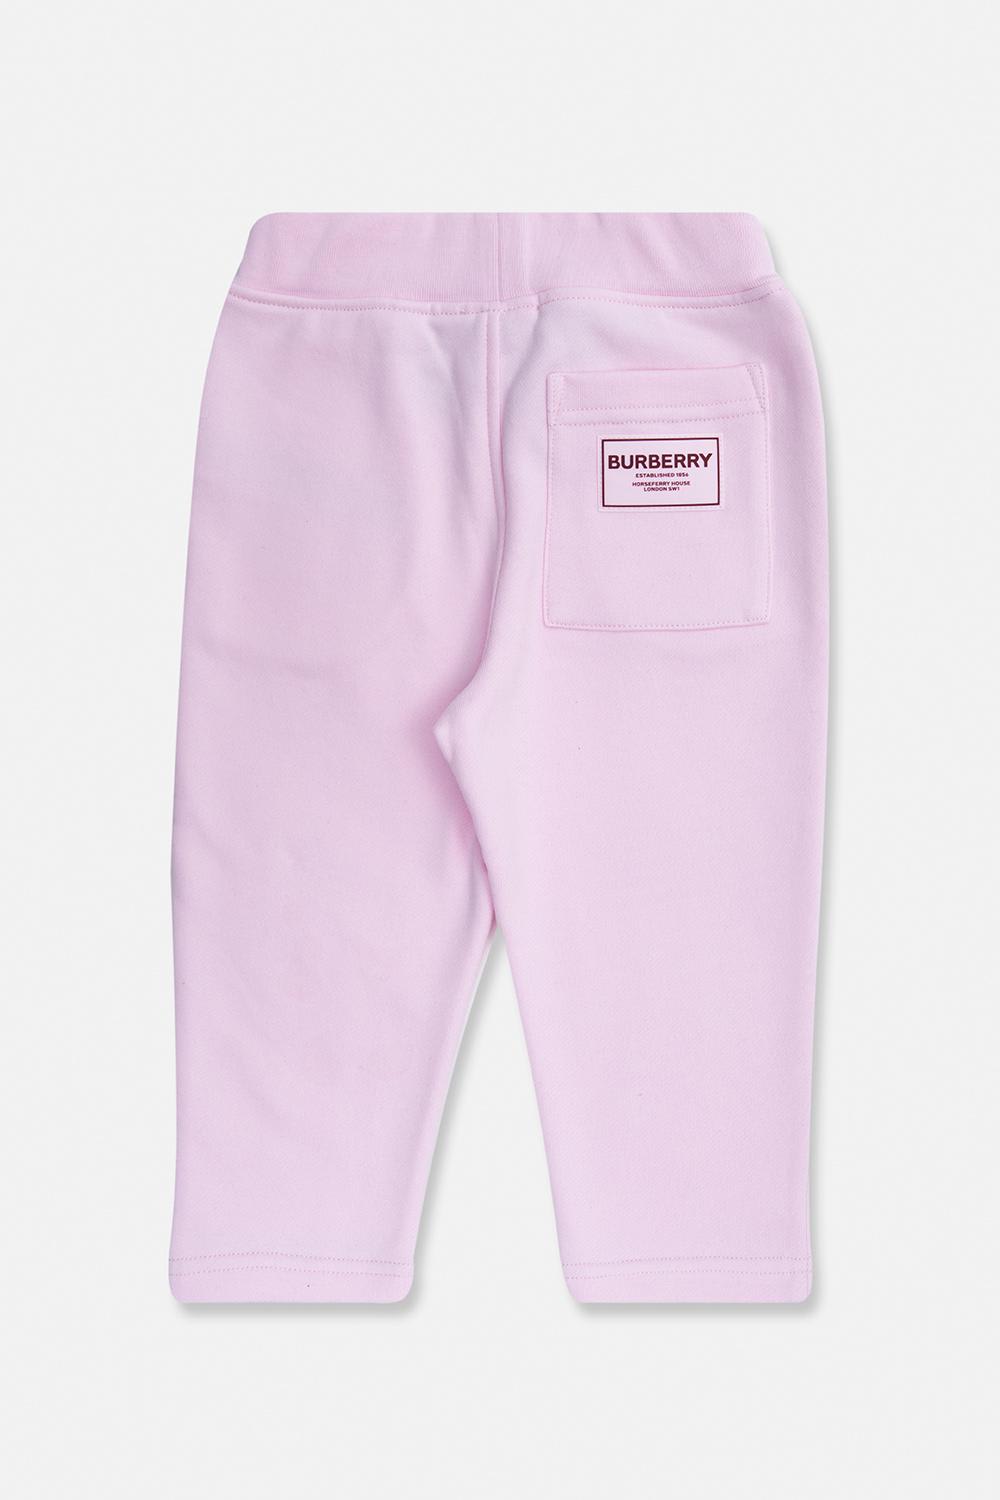 Shop Burberry Sweatpants With Teddy Bear Motif In Pink